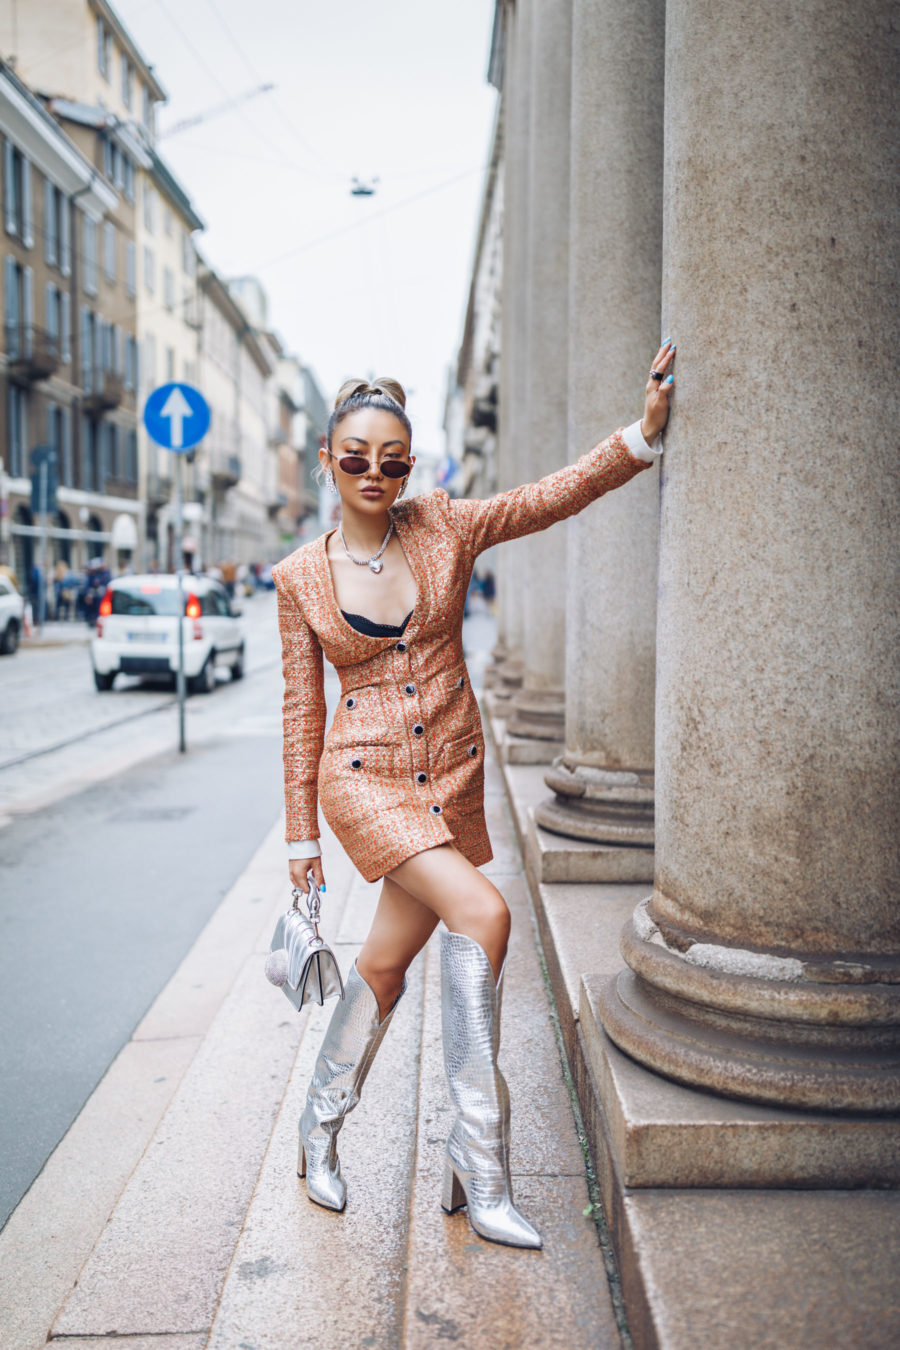 jessica wang wearing a tweed blazer dress with metallic paris texas boots and a gedebe tophandle bag while sharing casual spring suits for women // Jessica Wang - Notjessfashion.com